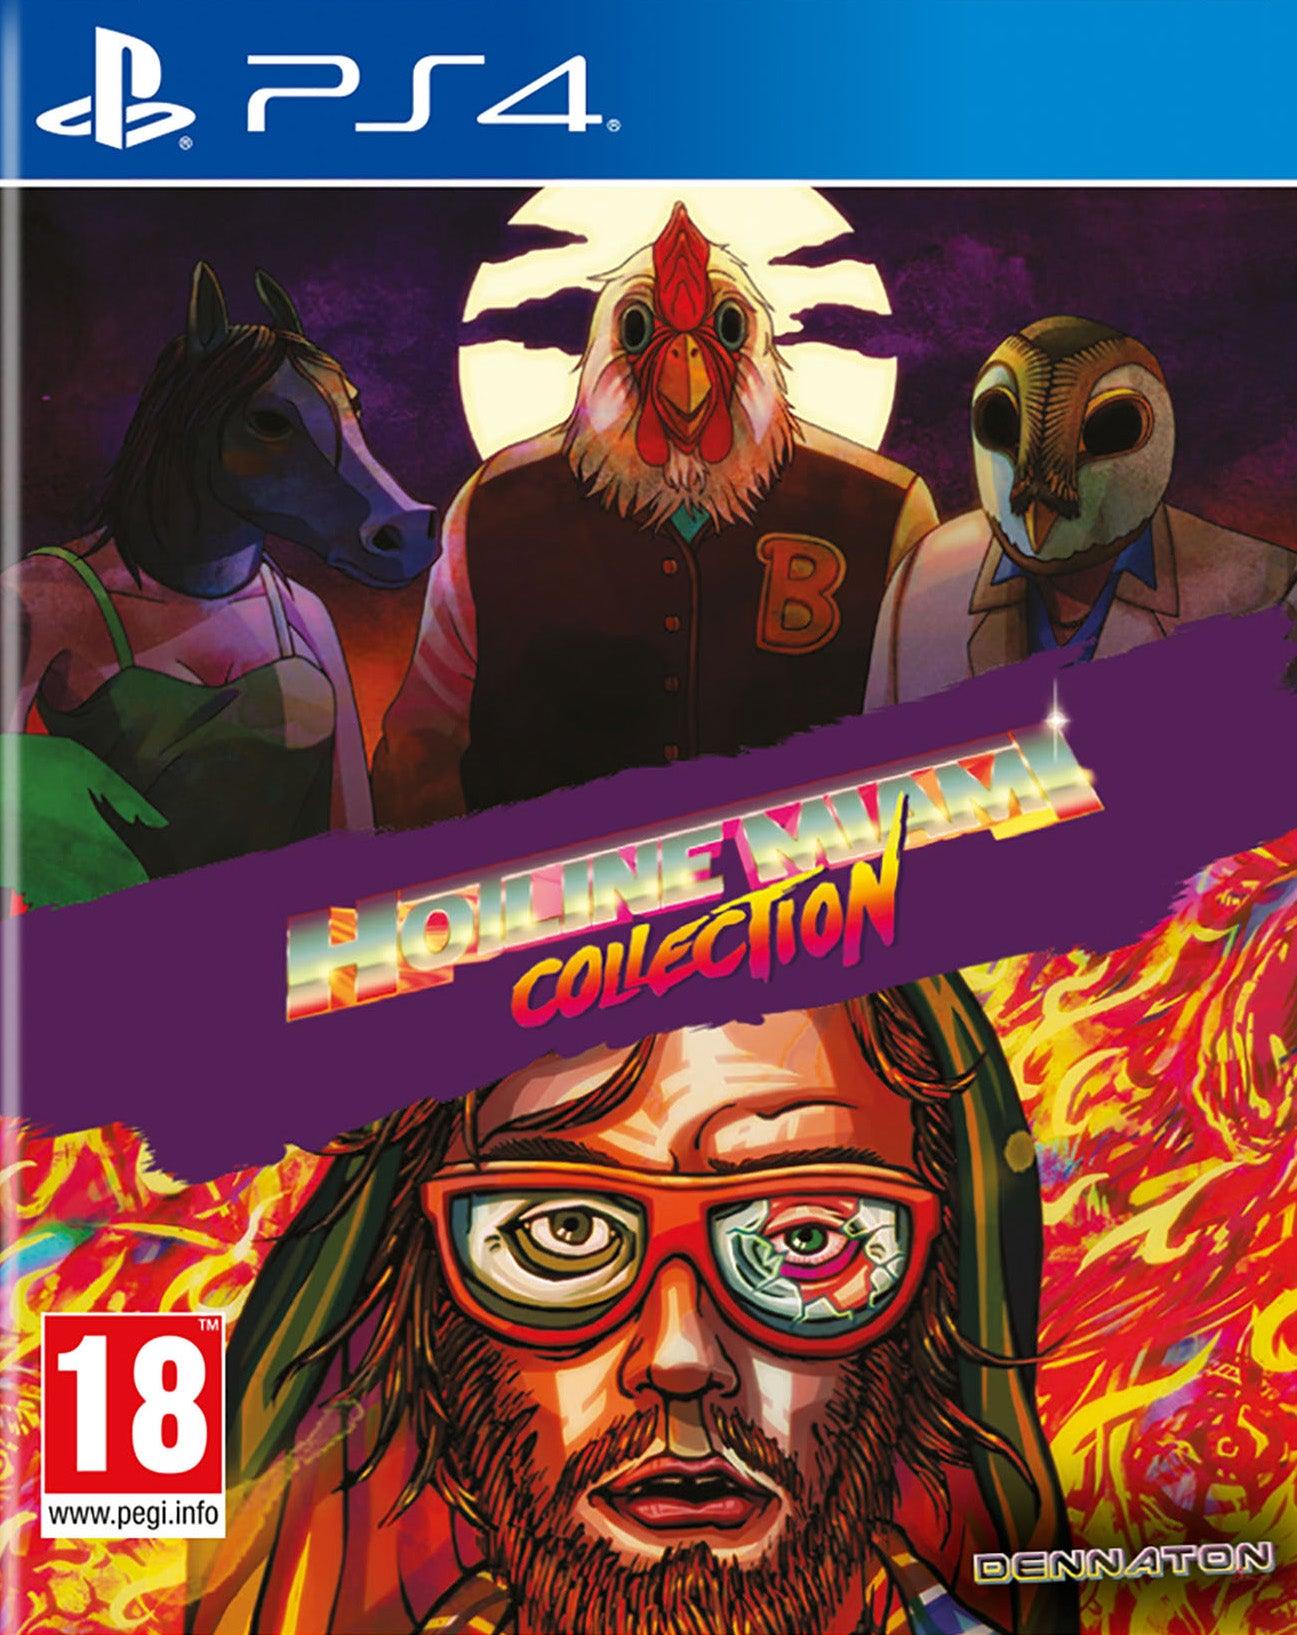 Hotline Miami Collection - Want a New Gadget